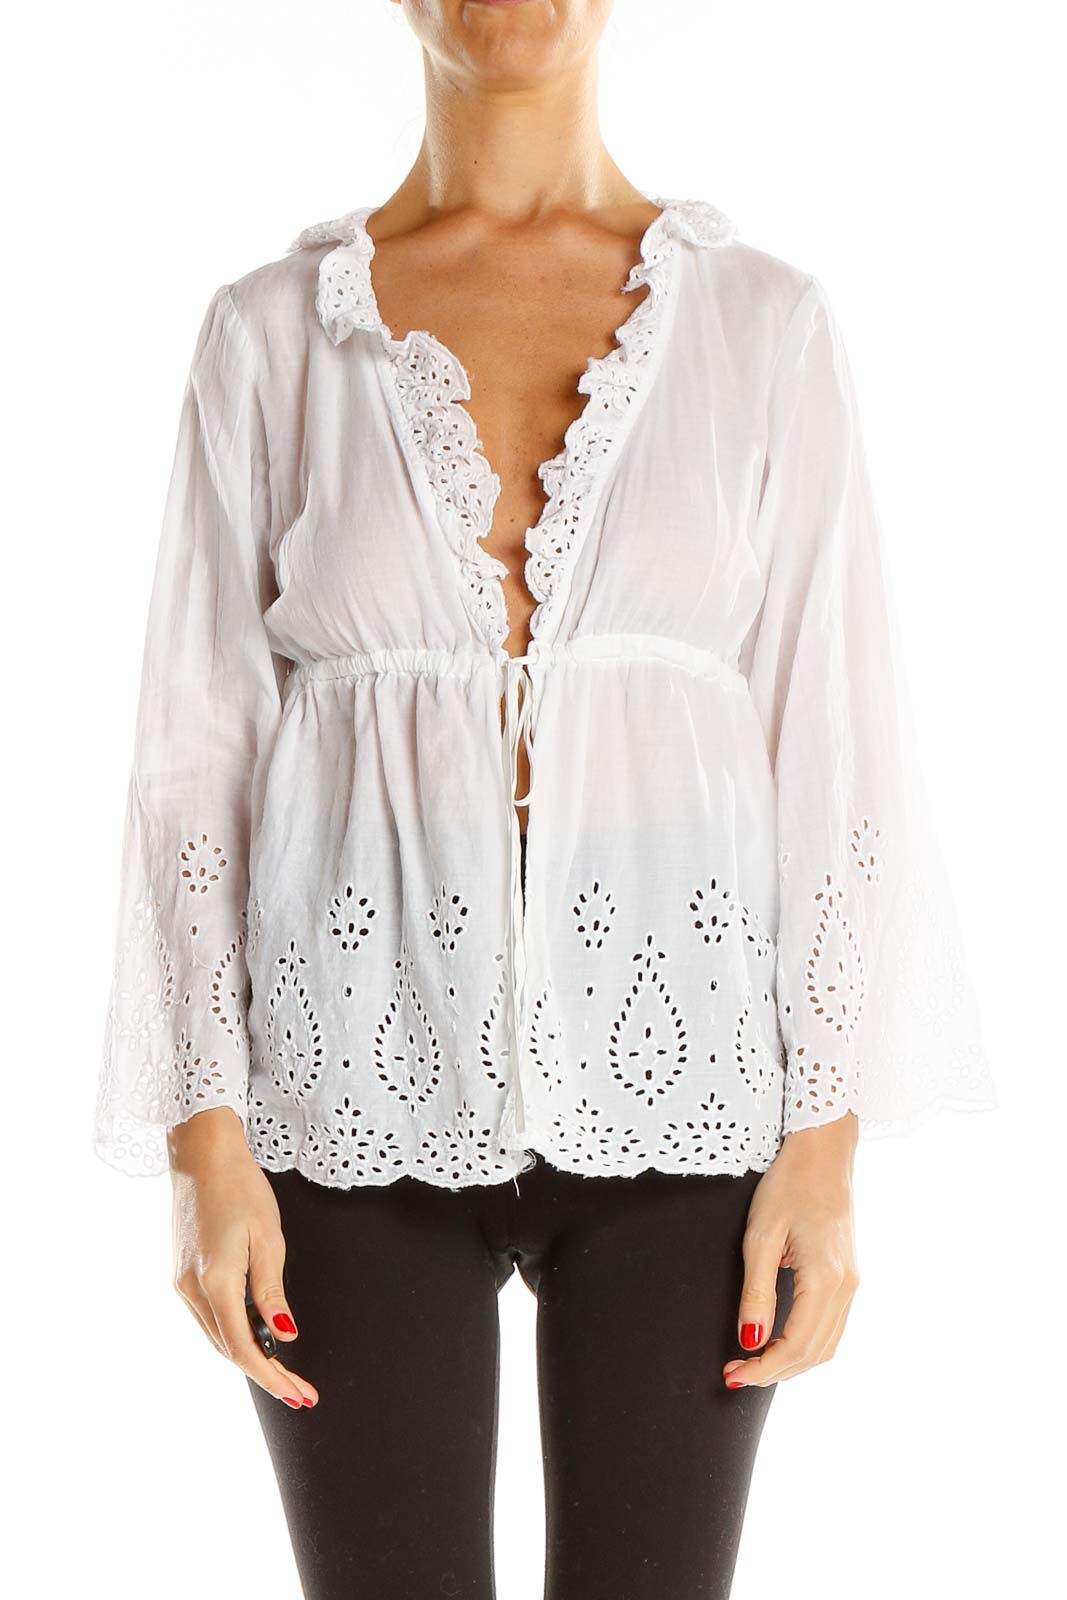 White Eyelet Delicate Tie Front Top Front